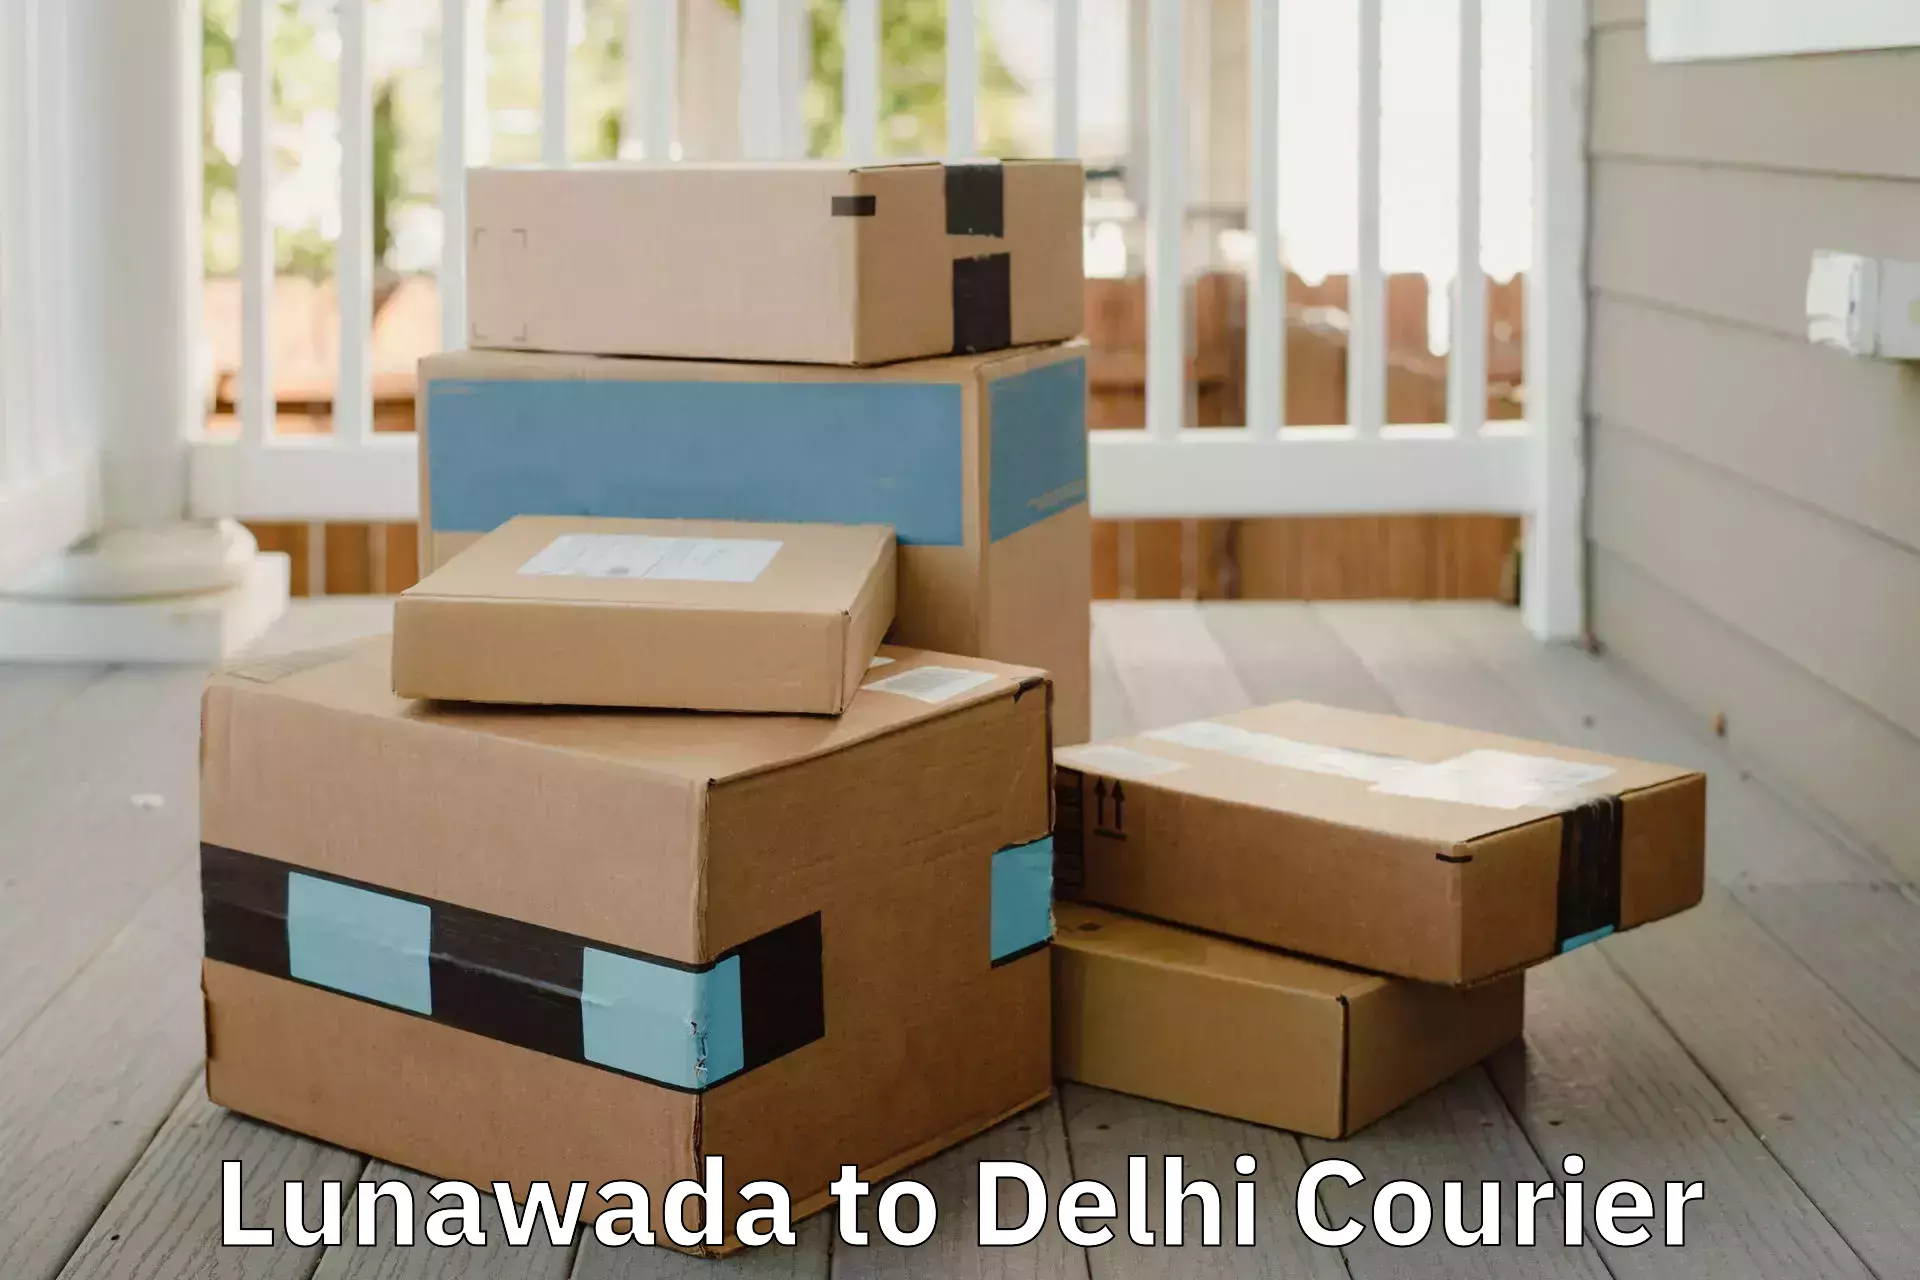 Quality relocation services Lunawada to University of Delhi